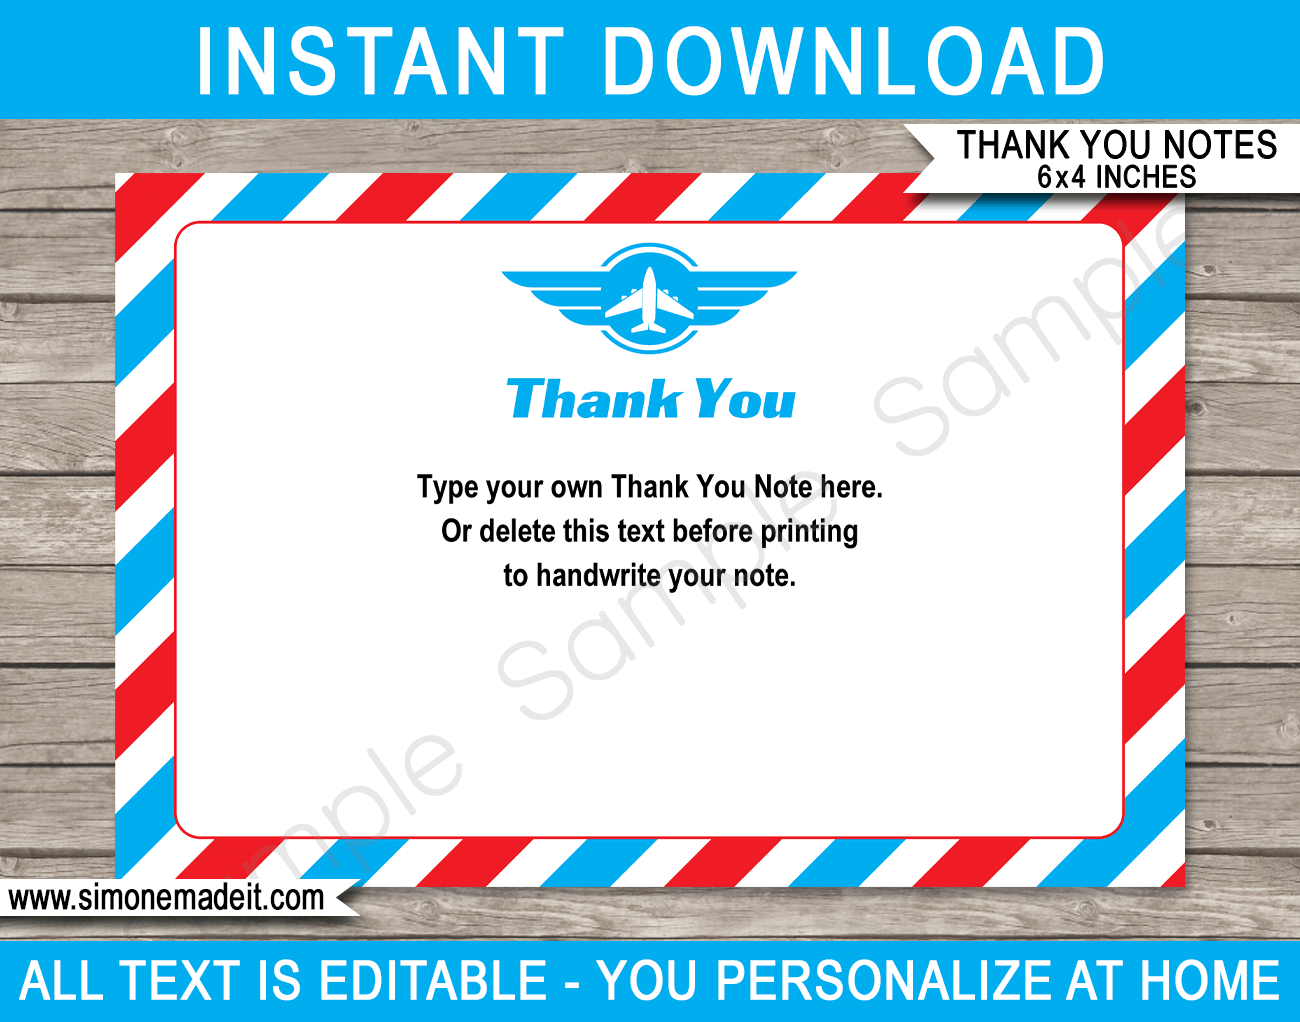 Printable Airplane Party Thank You Cards Template - Favor Tags - Airplane Birthday Party theme - DIY Editable Text - Instant Download via simonemadeit.com